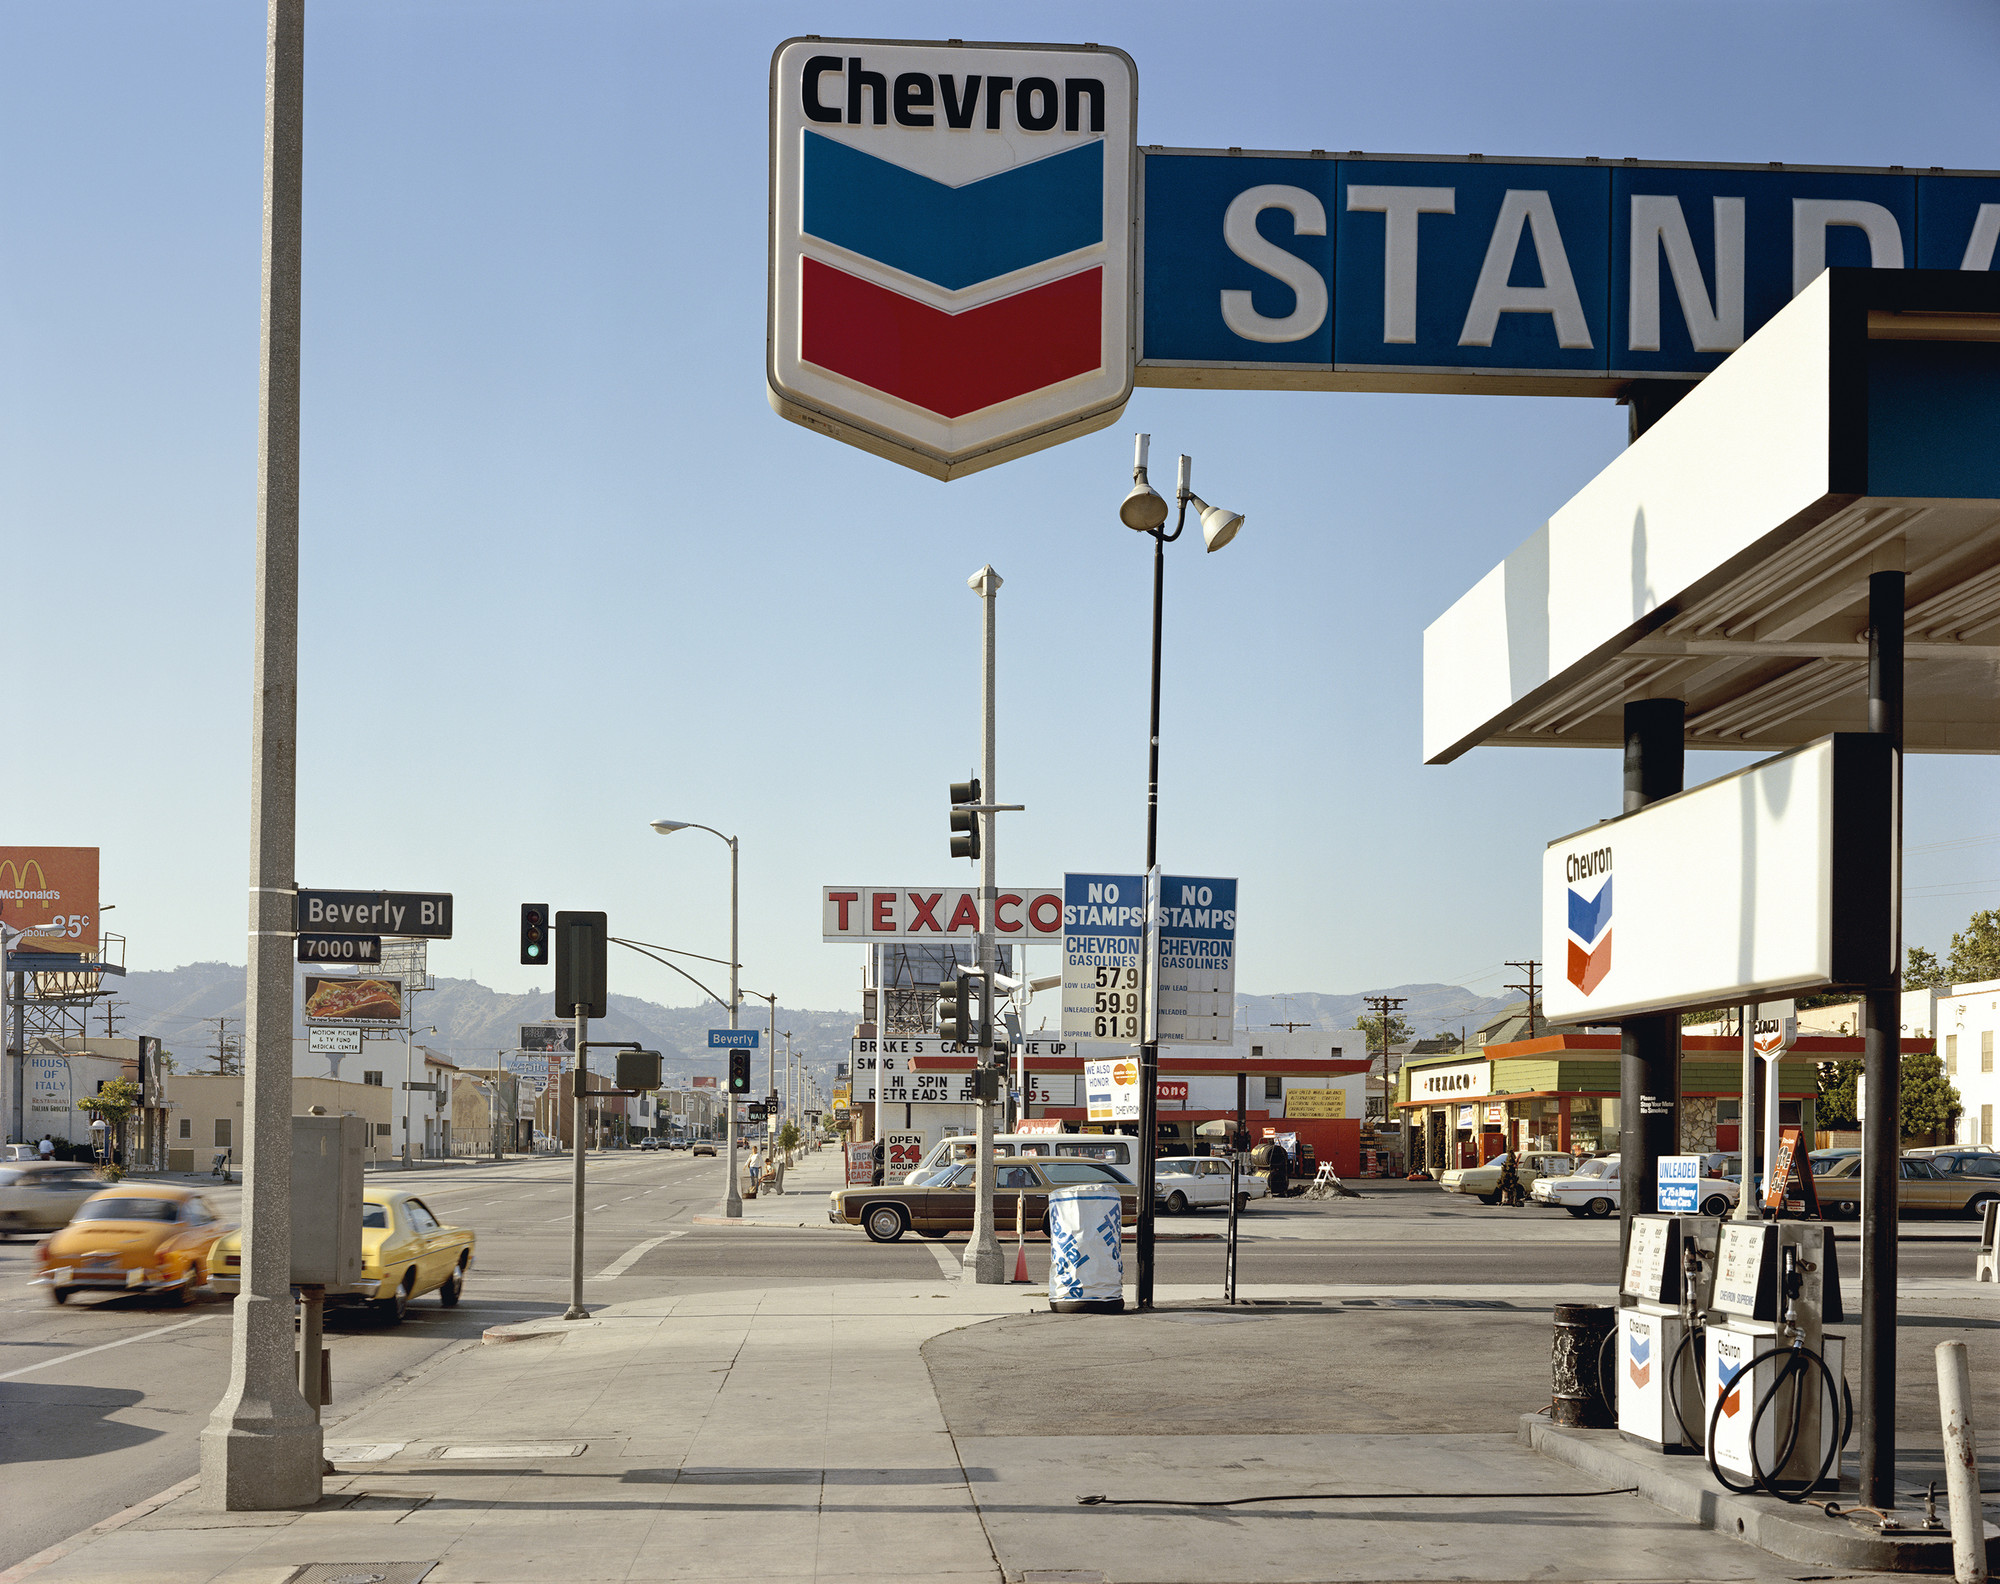 Stephen Shore (American, born 1947). _Beverly Boulevard and La Brea Avenue, Los Angeles, California, June 21, 1975._ 1975. Chromogenic color print, printed 2013, 17 x 21 3/4" (43.2 x 55.2 cm). The Museum of Modern Art, New York. Acquired through the generosity of Thomas and Susan Dunn, 2013